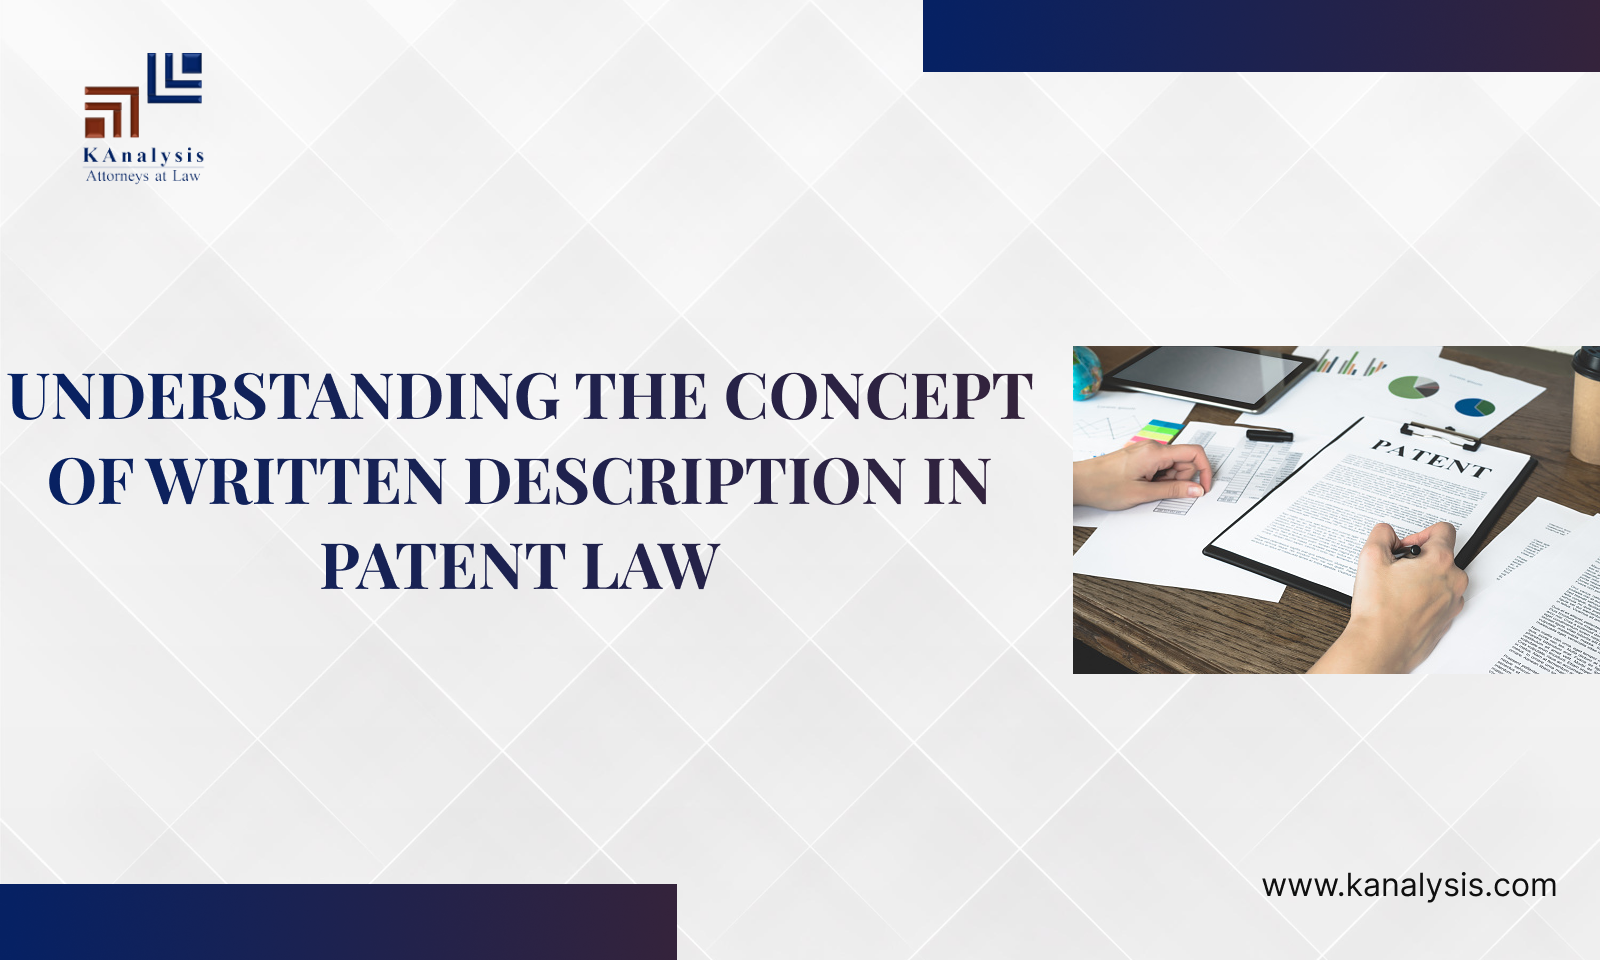 <strong>UNDERSTANDING THE CONCEPT OF WRITTEN DESCRIPTION IN PATENT LAW</strong>